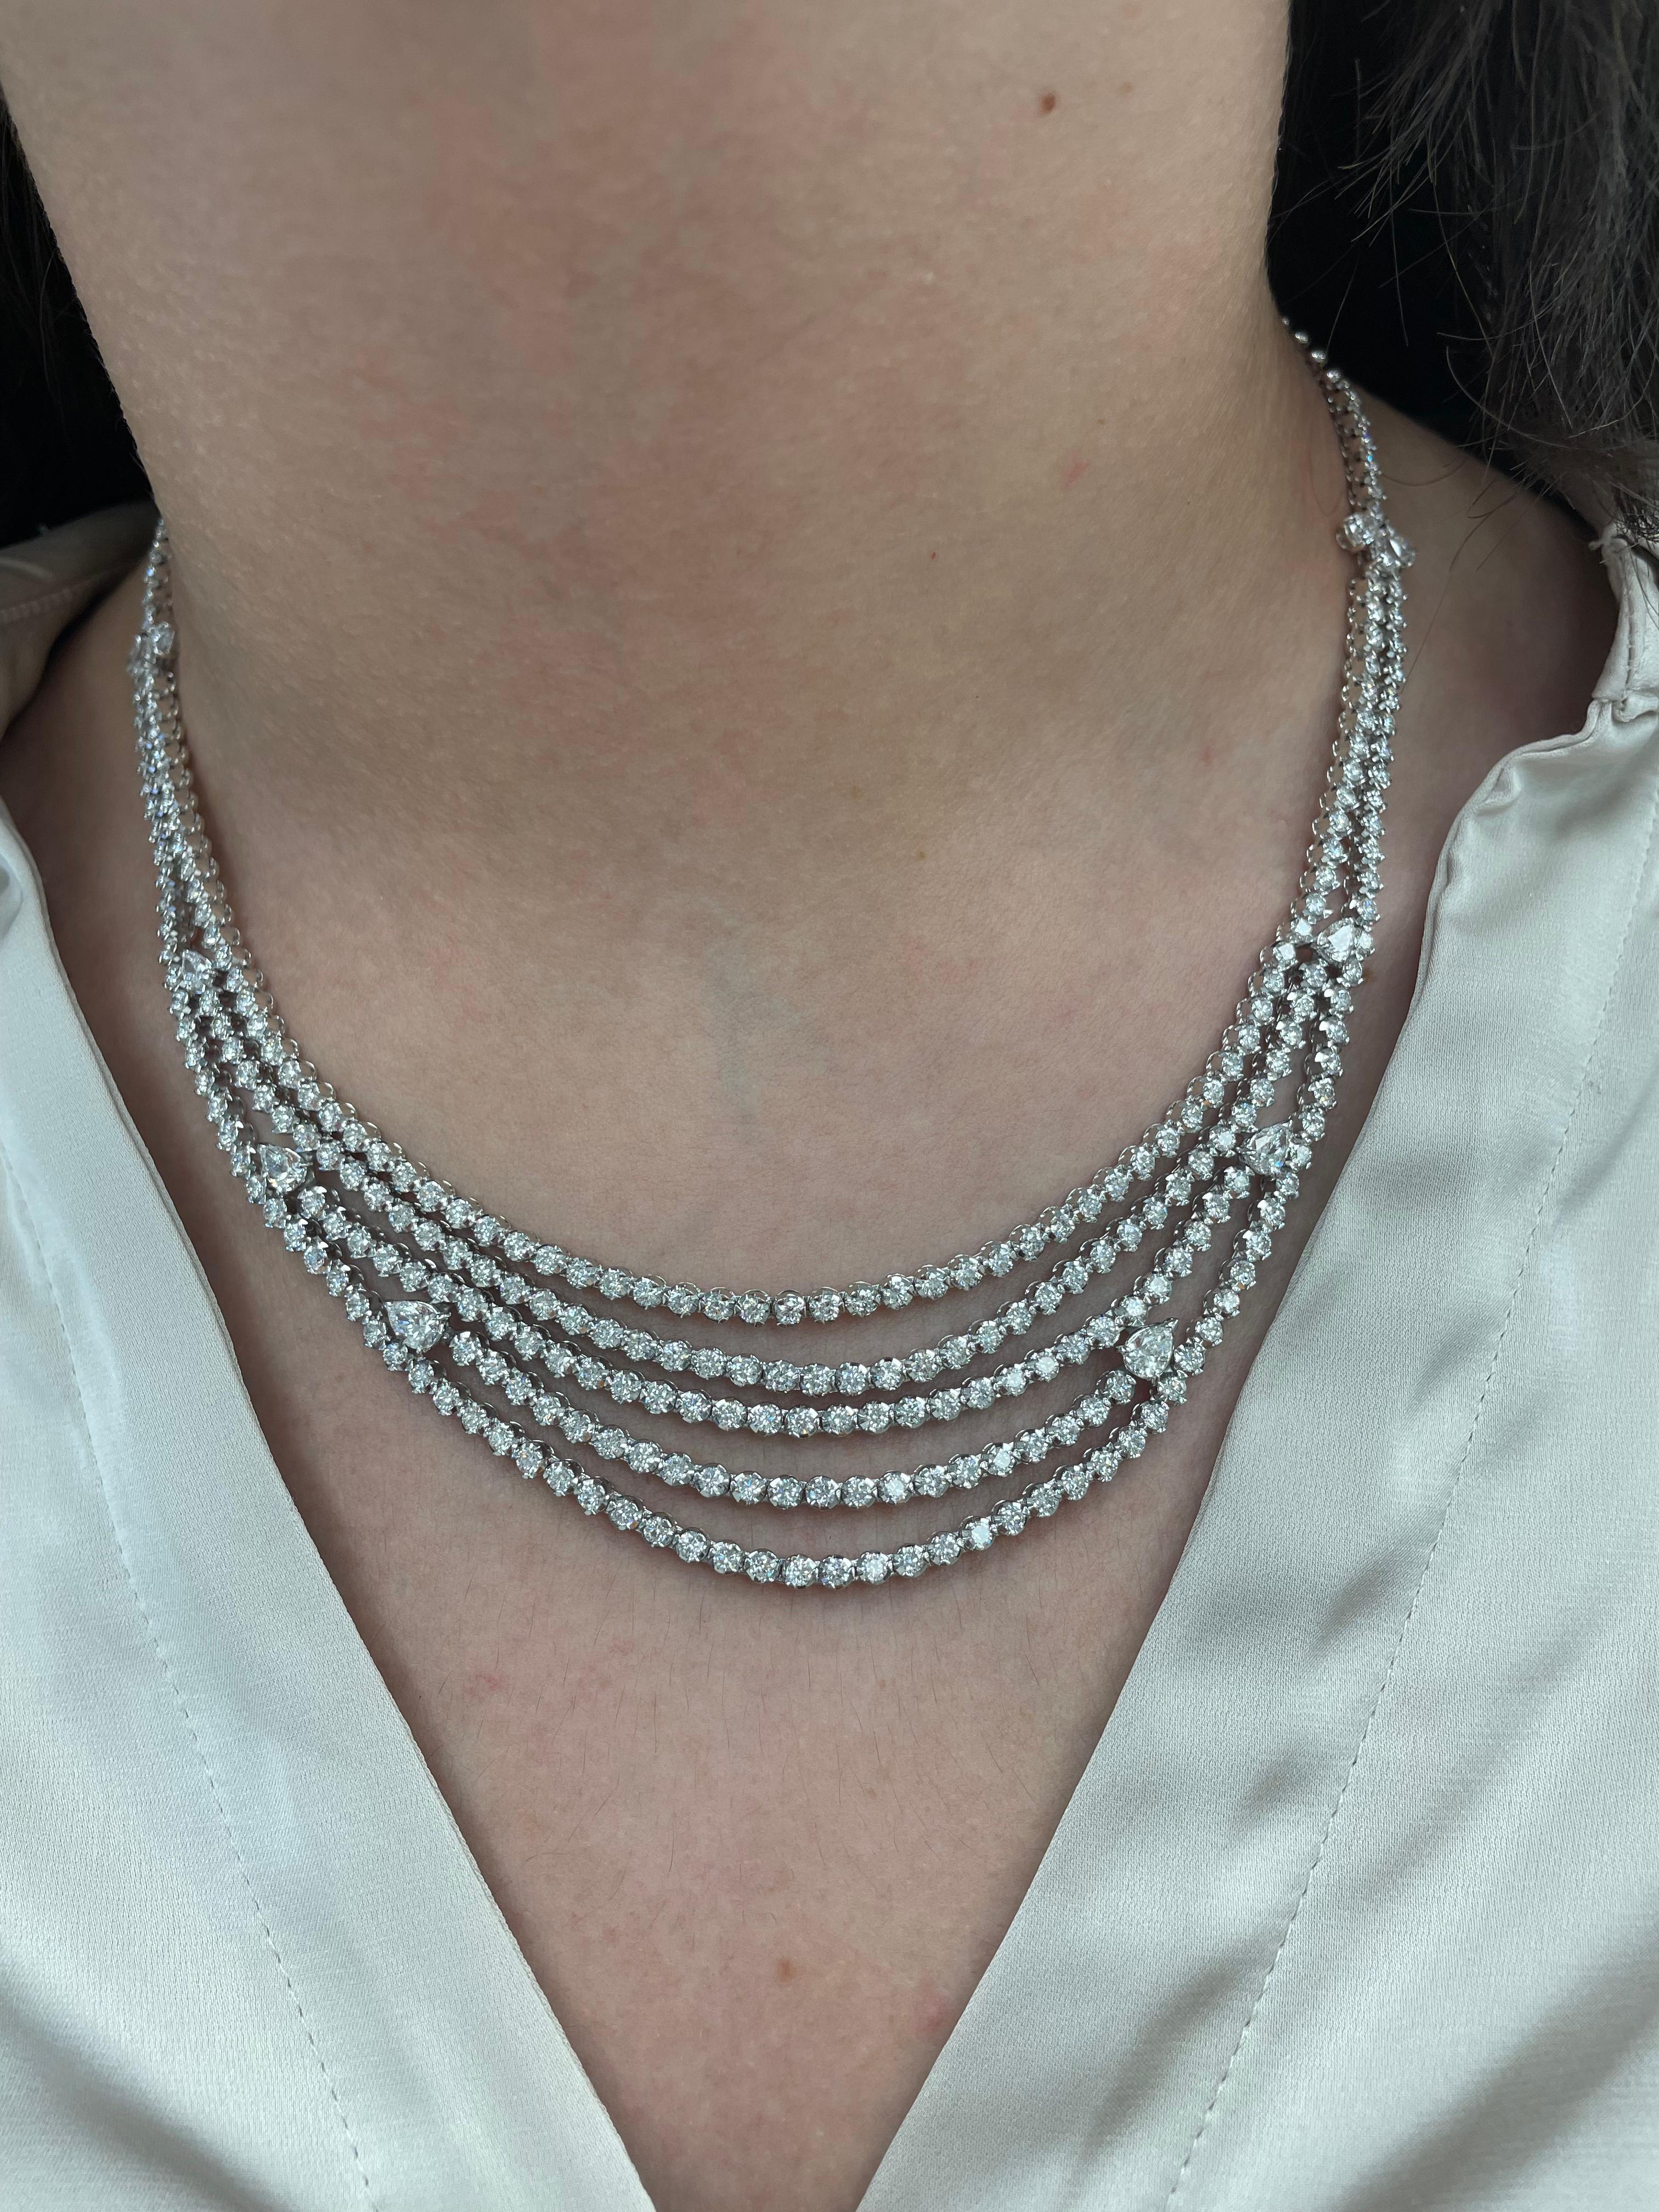 Sensational 3 row diamond tennis necklace. High jewelry by Alexander of Beverly Hills.
A big look for the value. 
12 center pear shape diamonds, 2.24 carats. Approximately F/G color and VVS1/VVS2 clarity. 258 round brilliant diamonds, 9.69 carats.